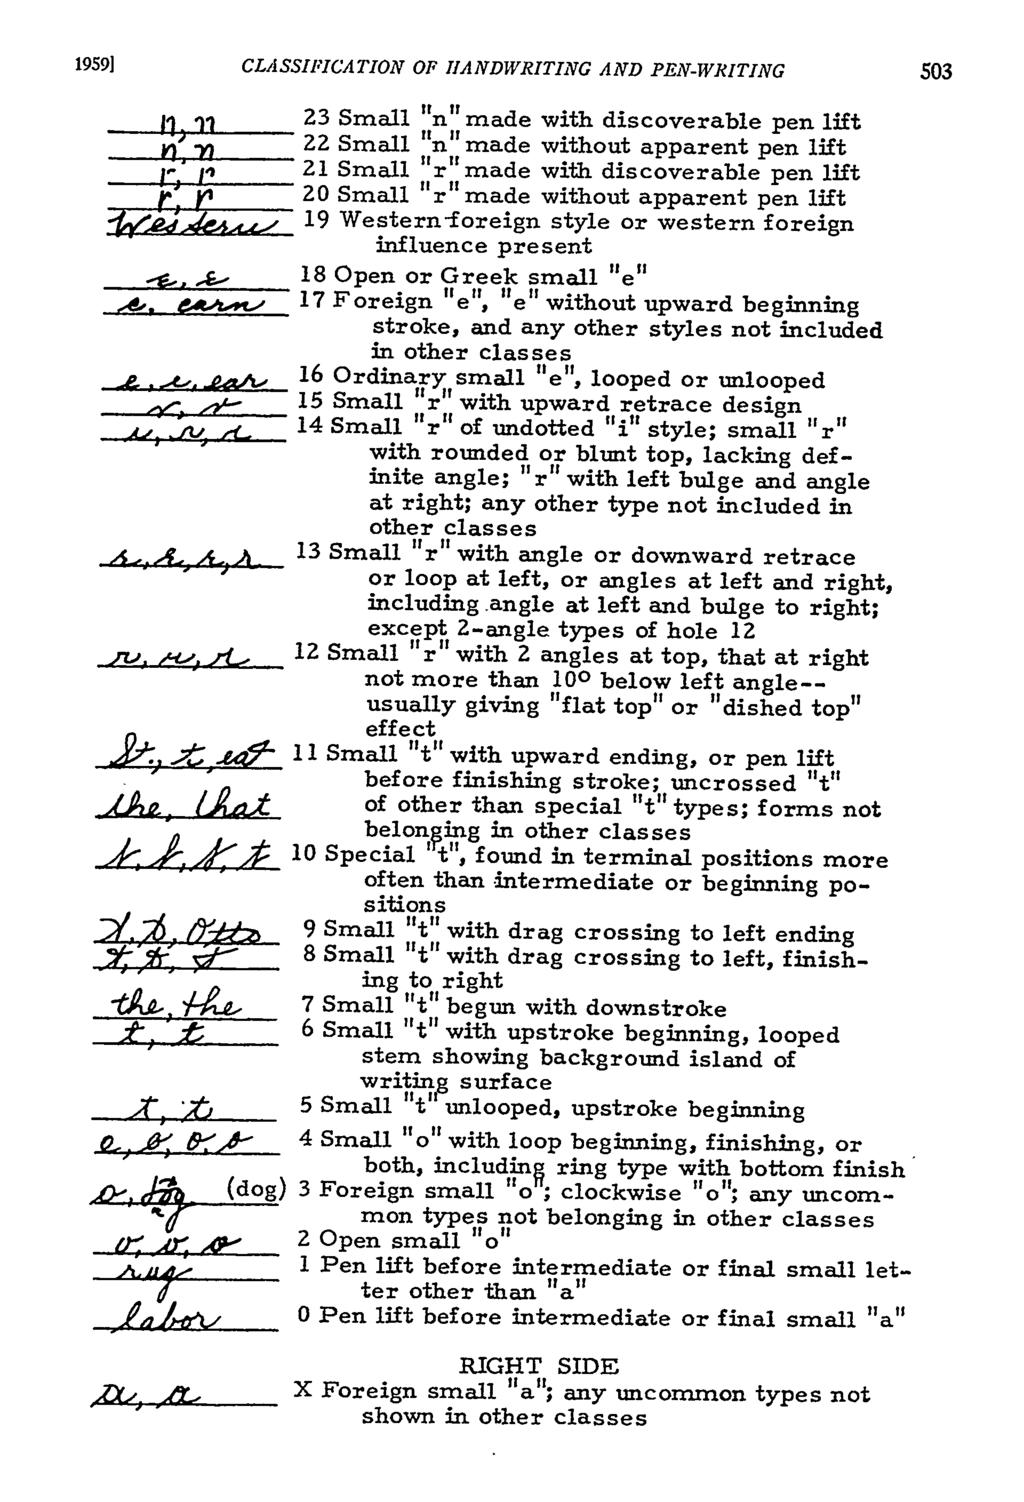 19591 CLASSIFICATION OF HANDWRITING AND PEN-WRITING -i". P-....- -~ A a A404A 9-' n!